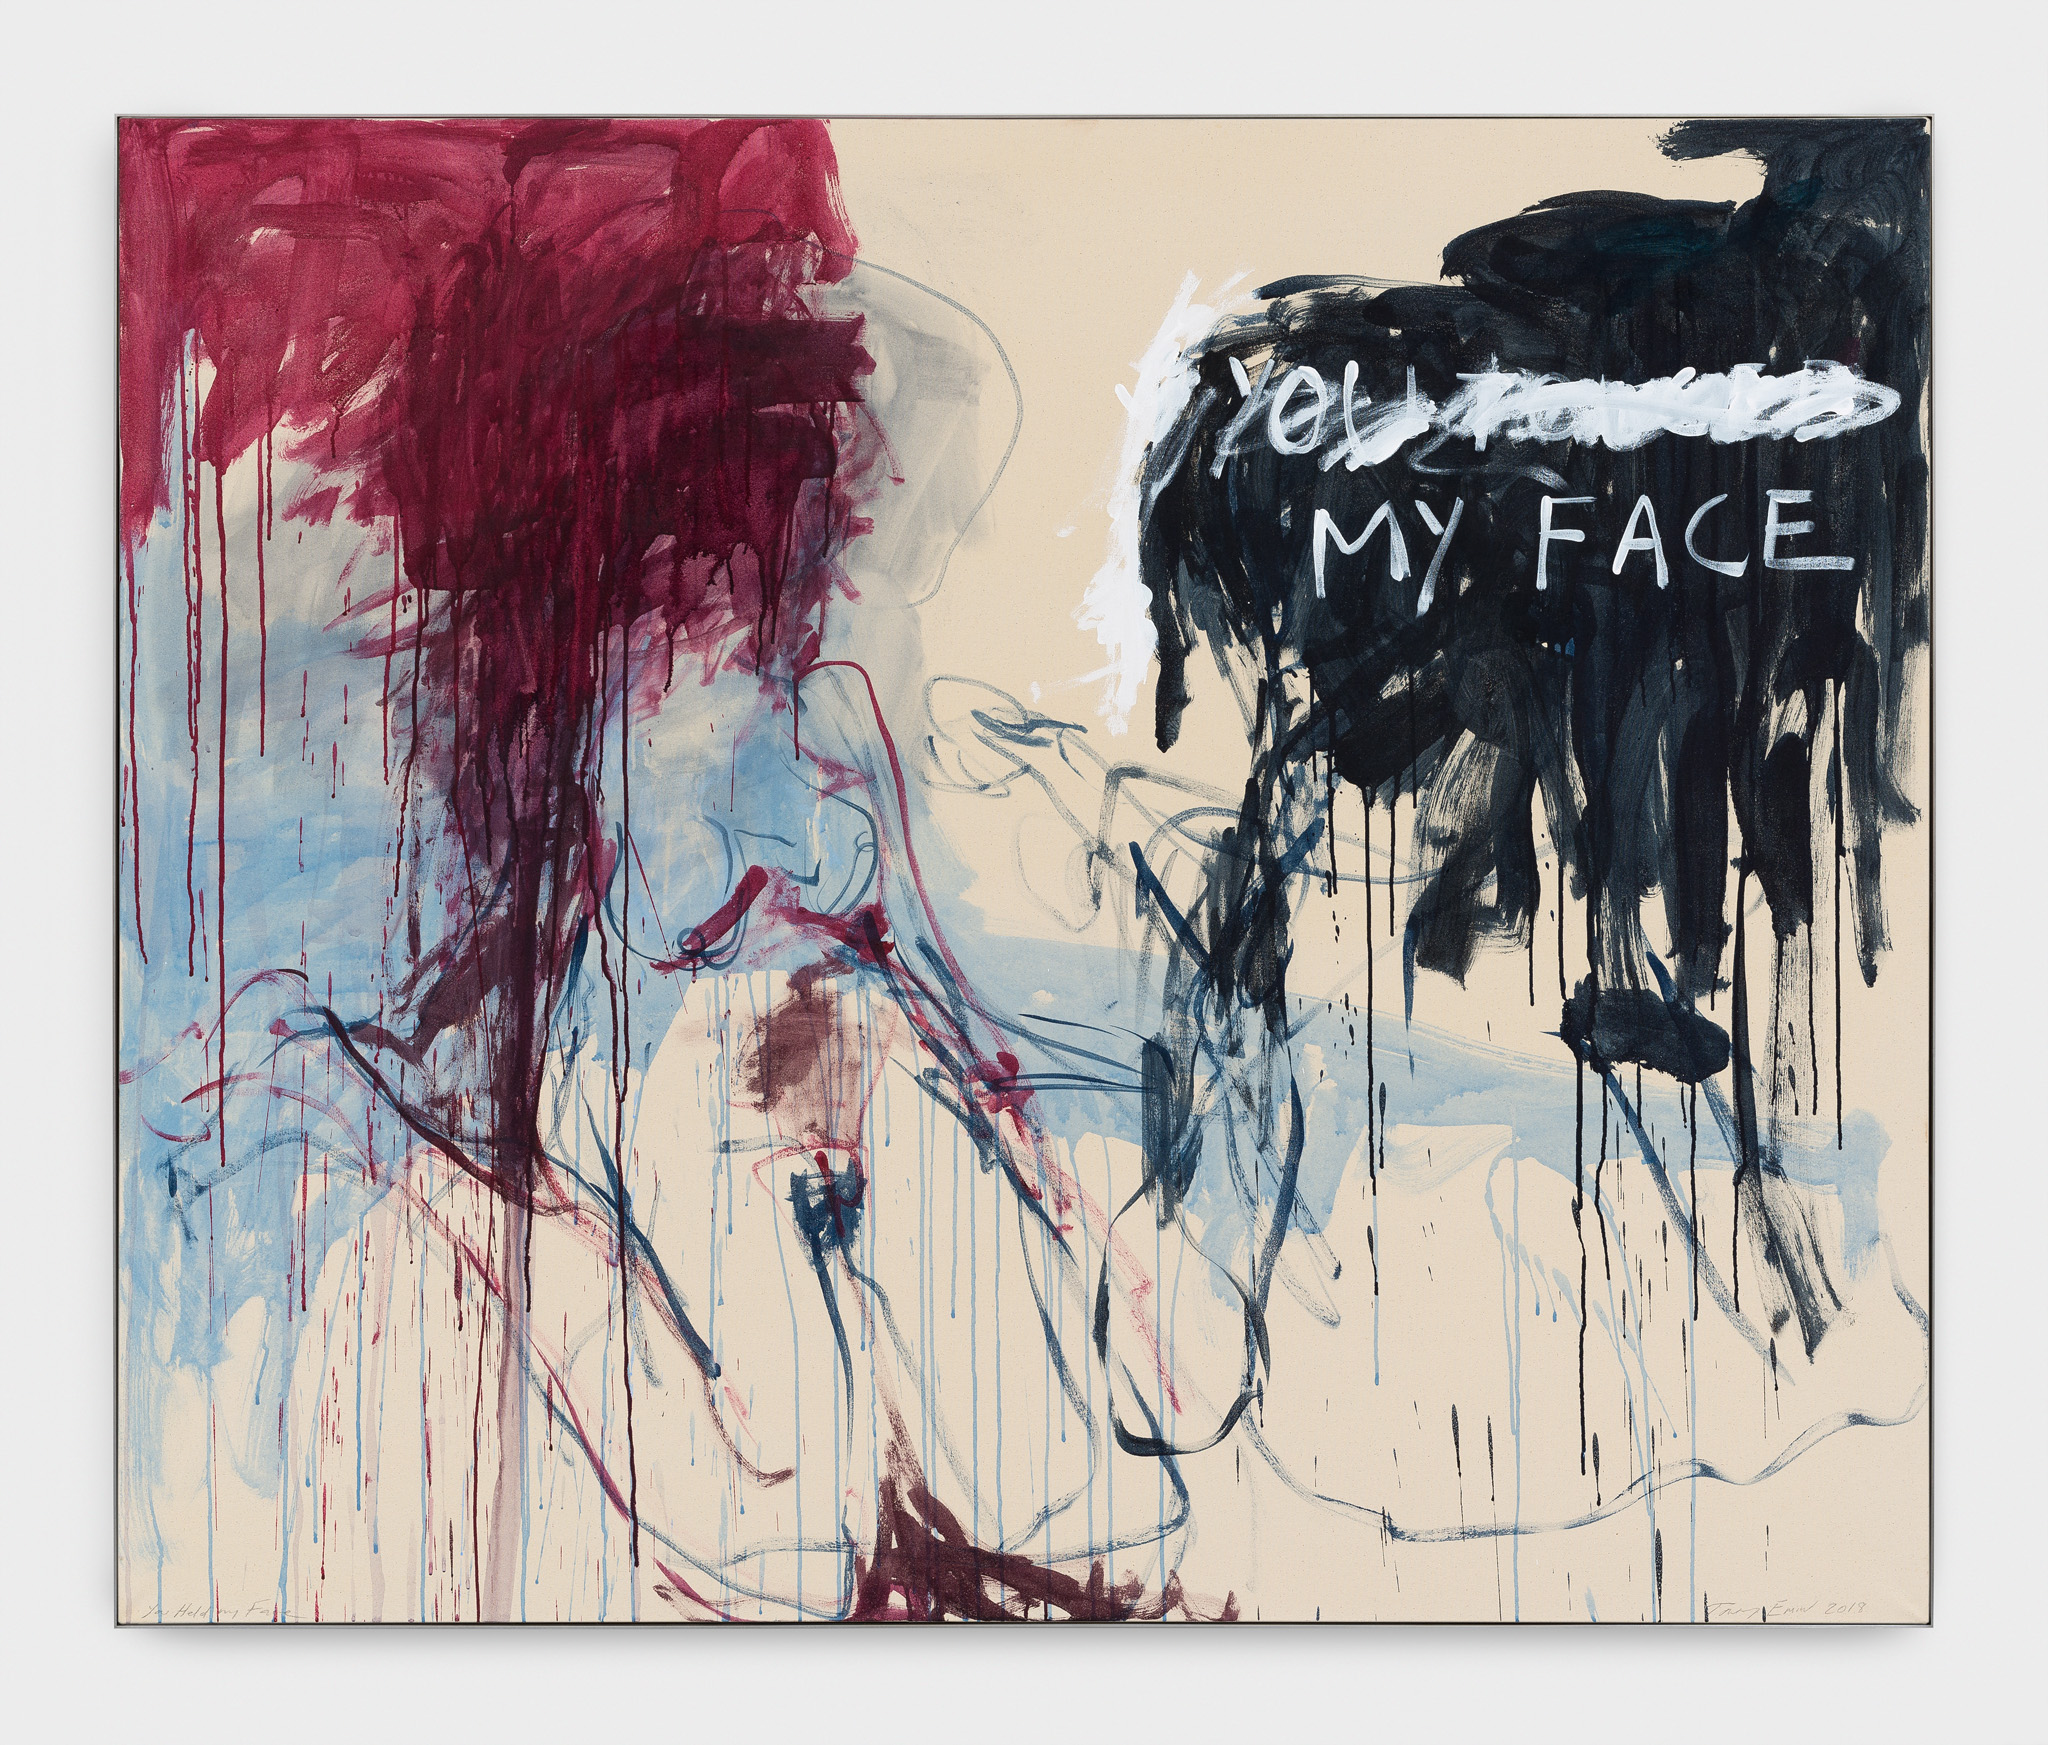 Art Projects presents a solo show by Tracey Emin